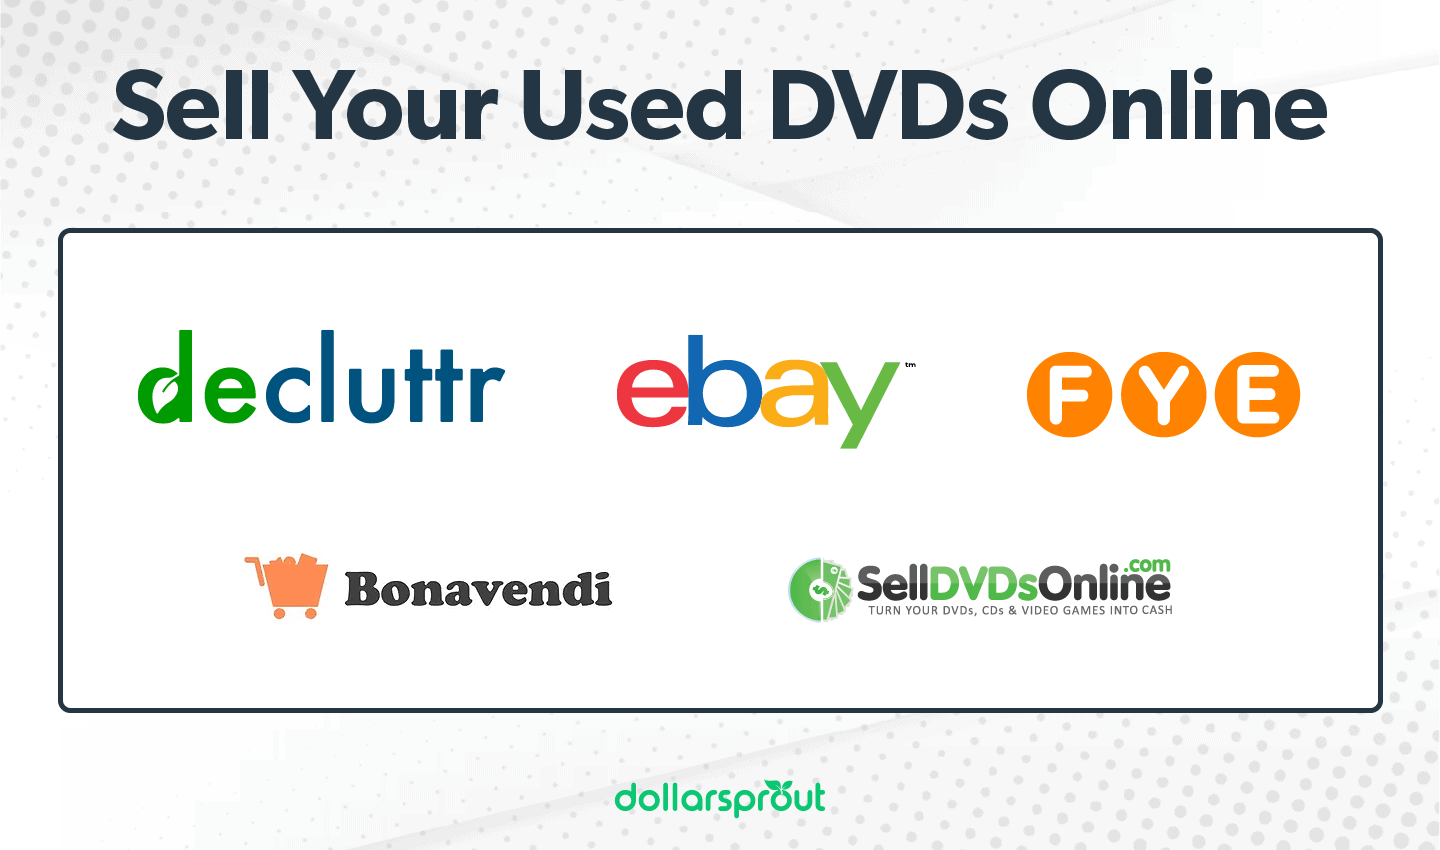 Sell Your Used DVDs Online